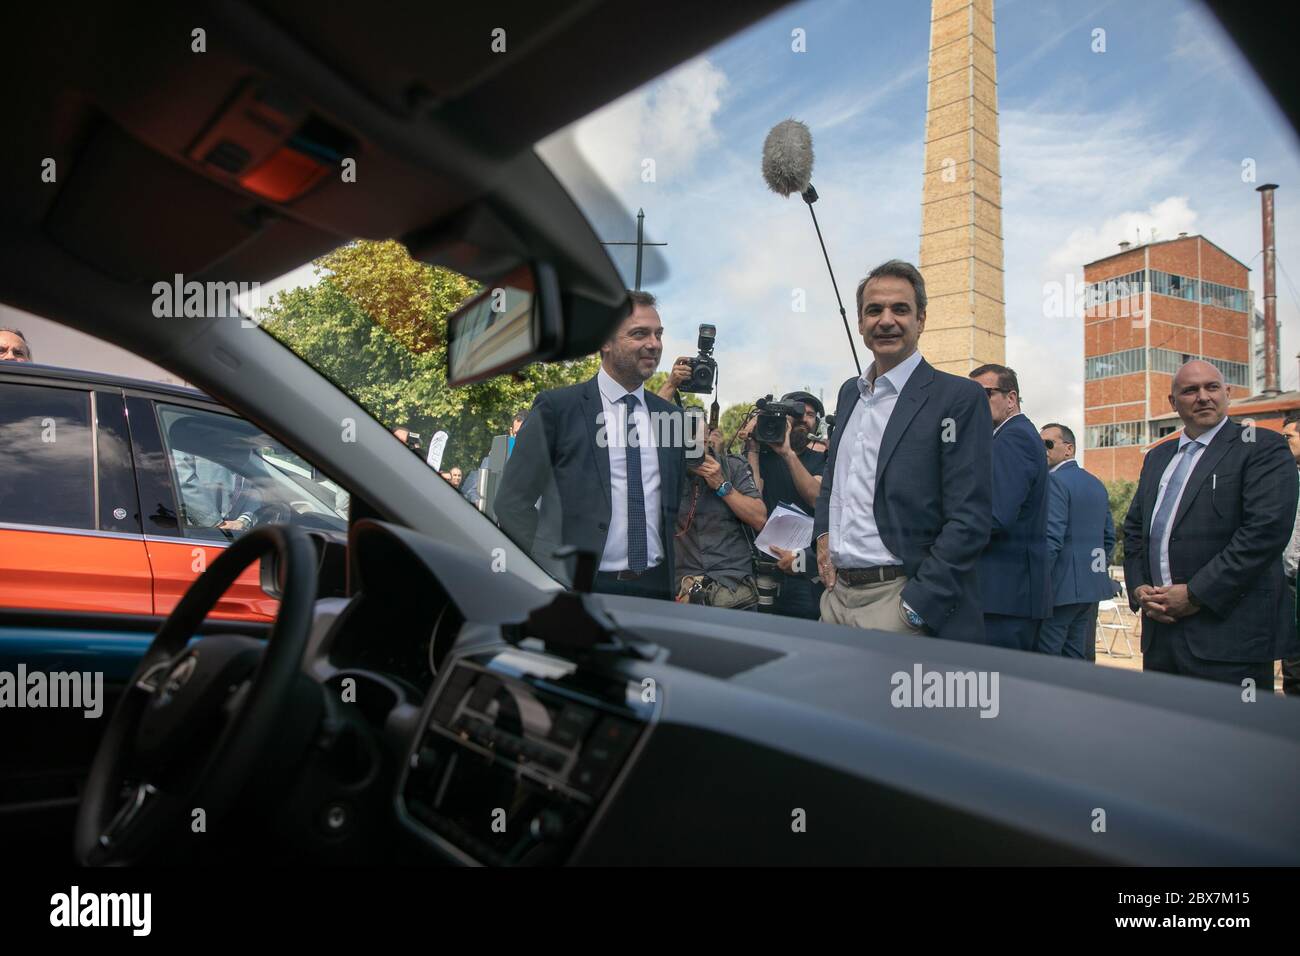 Athens, Greece. 5th June, 2020. Greek Prime Minister Kyriakos Mitsotakis (C) views new electric cars at a presentation event in Athens, Greece, on June 5, 2020. To mark World Environment Day on Friday, Greek Prime Minister Kyriakos Mitsotakis presented the government's plan for promoting electromobility, and the target is for one in three new vehicles in the country to be electric by 2030. Credit: Lefteris Partsalis/Xinhua/Alamy Live News Stock Photo